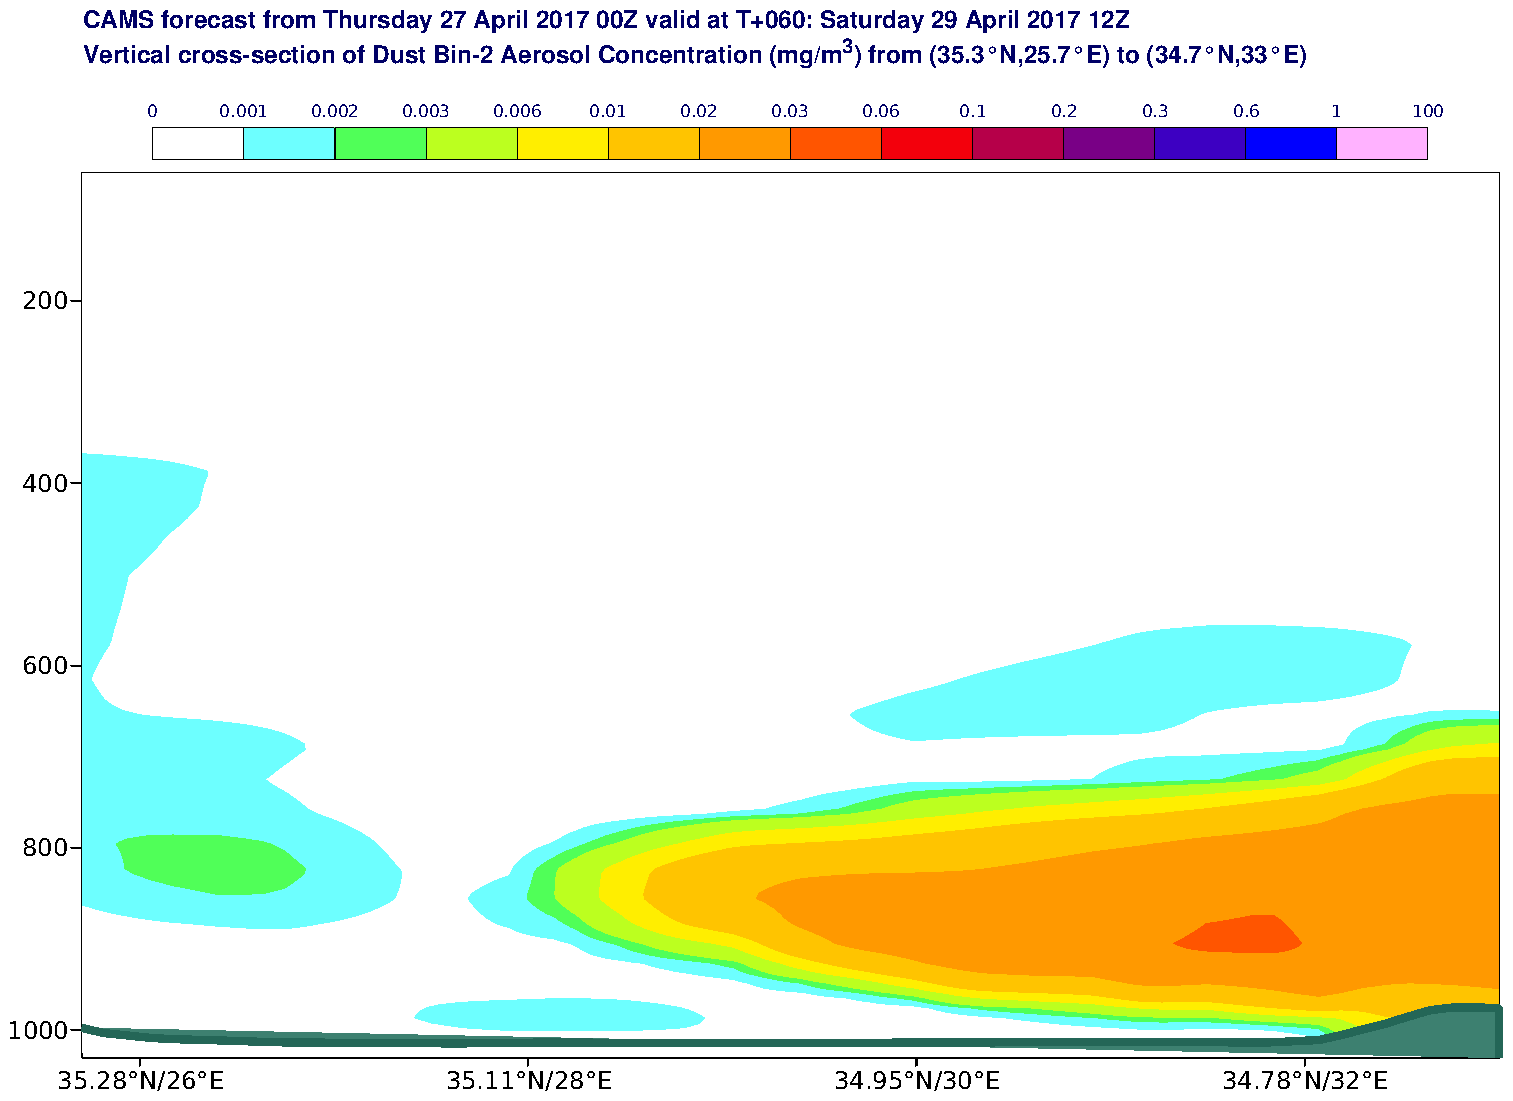 Vertical cross-section of Dust Bin-2 Aerosol Concentration (mg/m3) valid at T60 - 2017-04-29 12:00